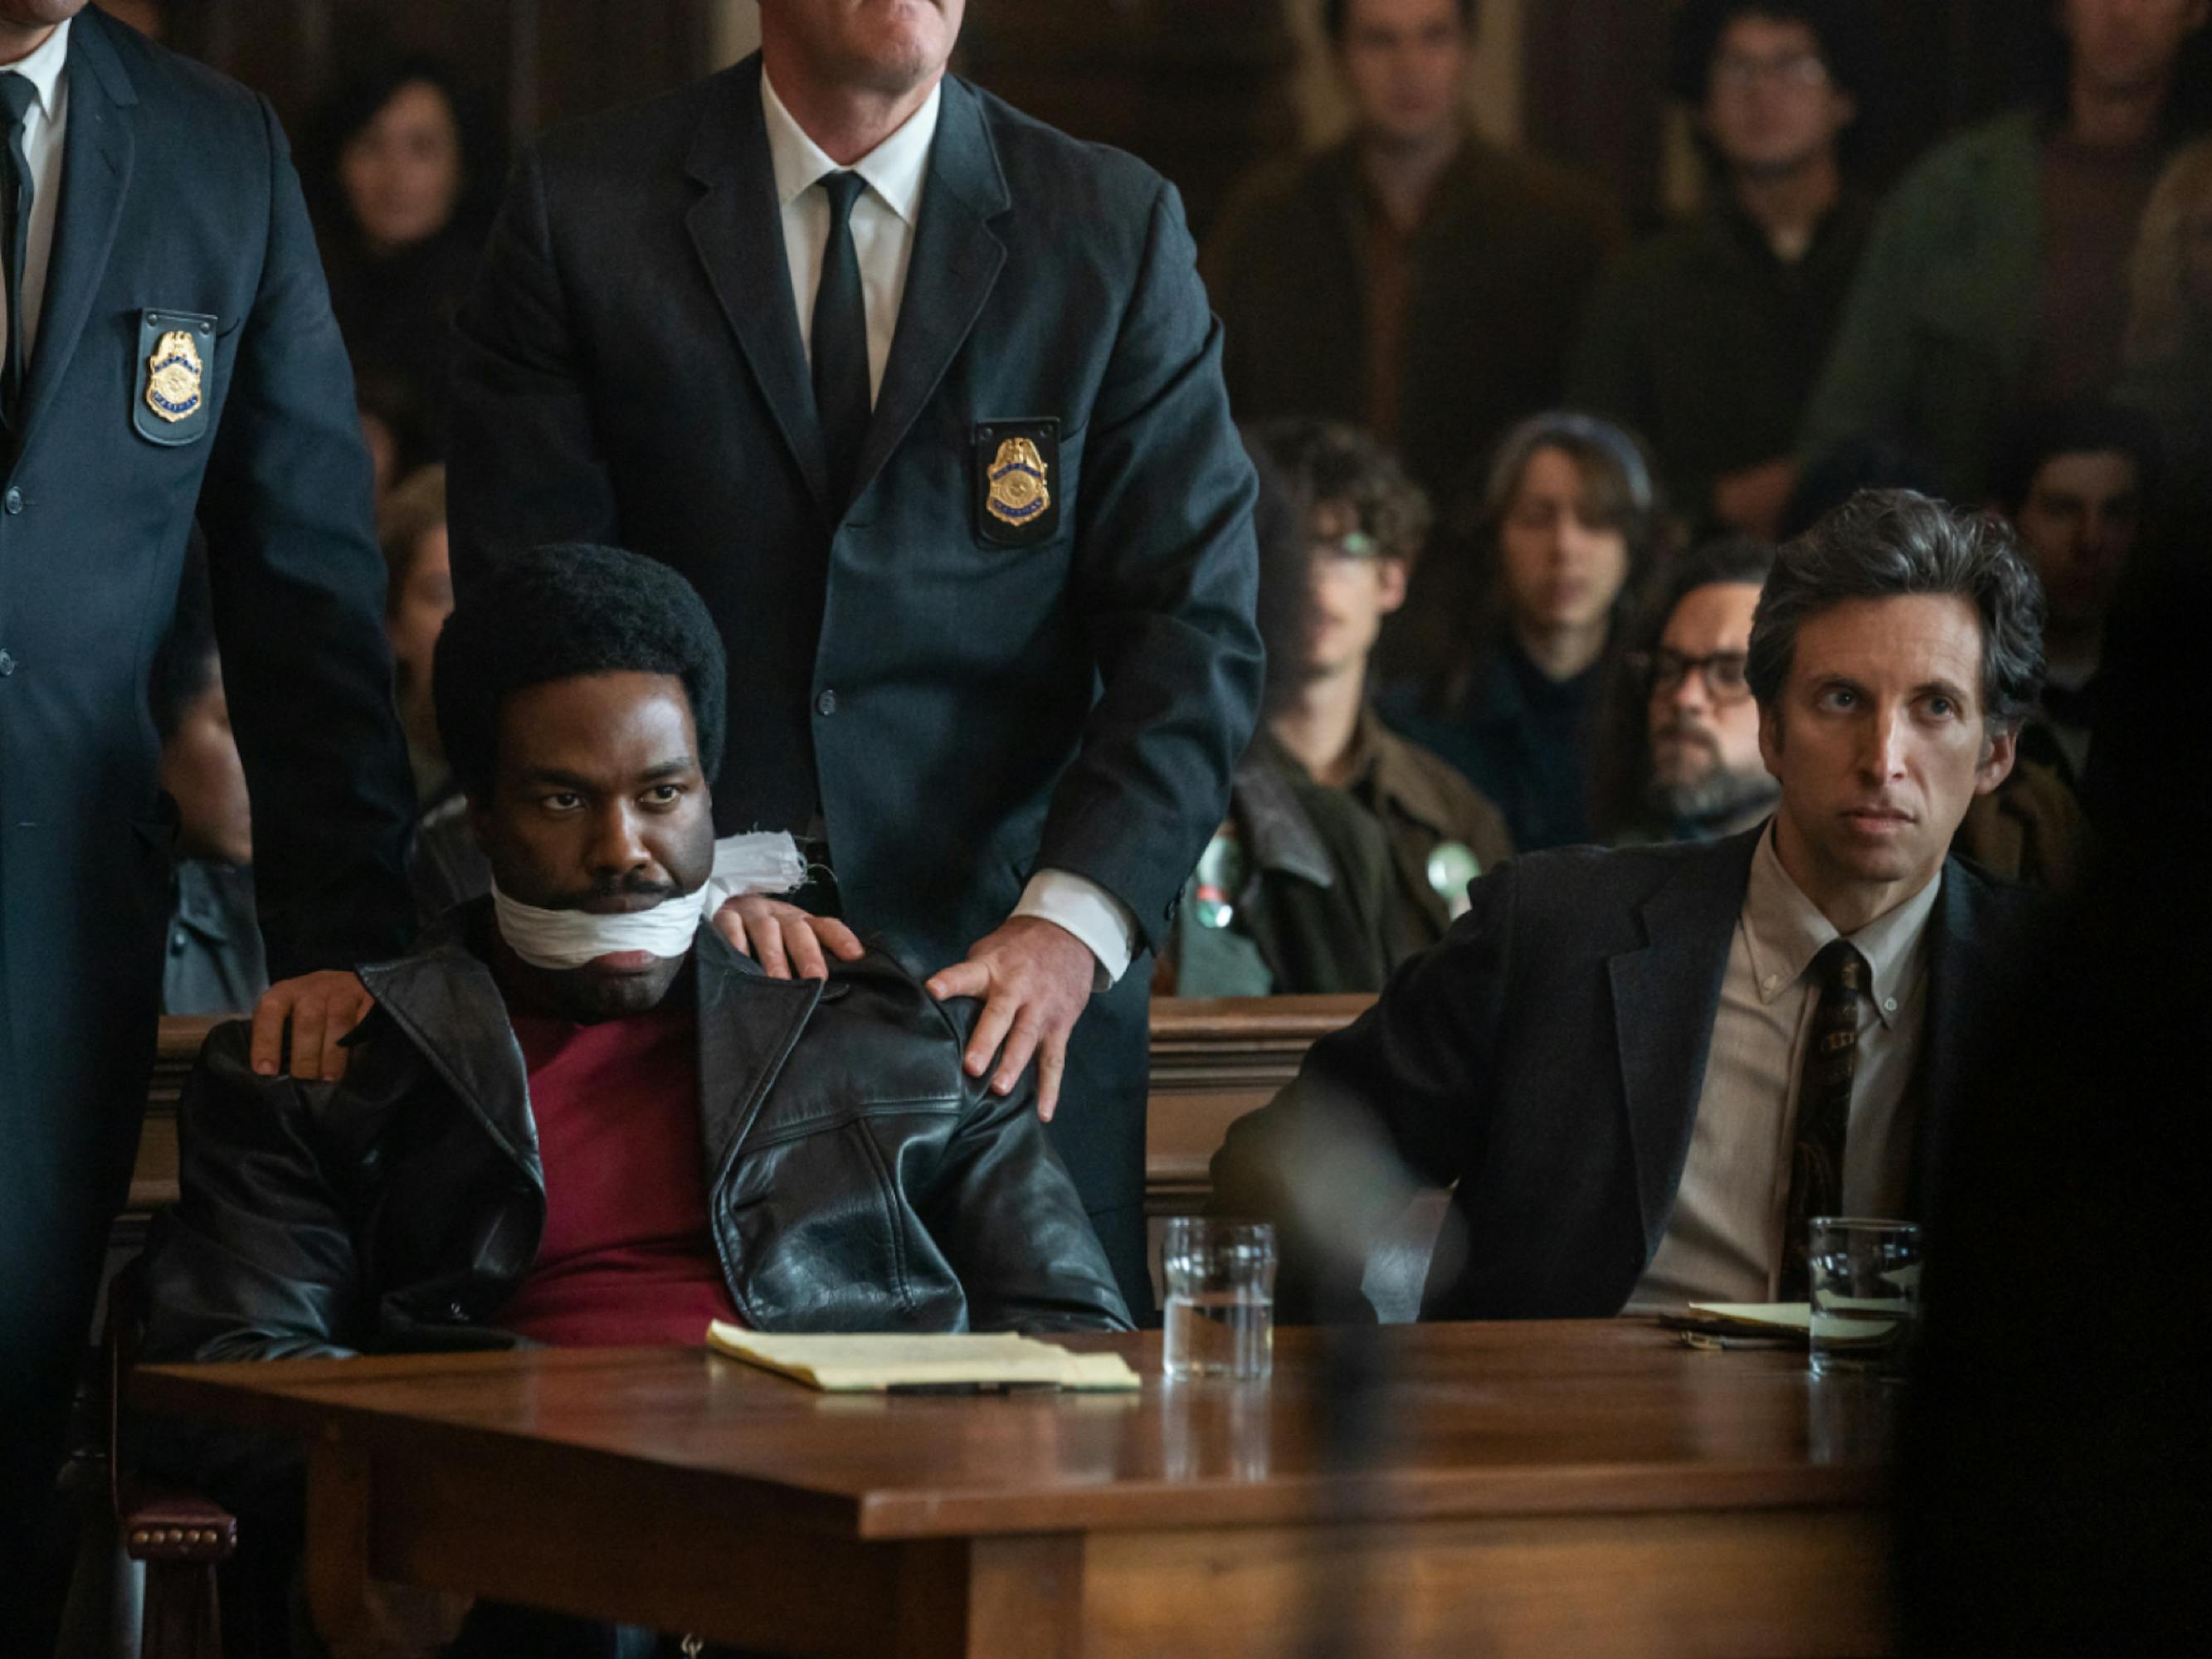 Abdul-Mateen in a scene from The Trial of the Chicago 7. He portrays Bobby Seale bound and gagged. Two bailiffs placing hands on his shoulders. He looks willfully toward the bench.